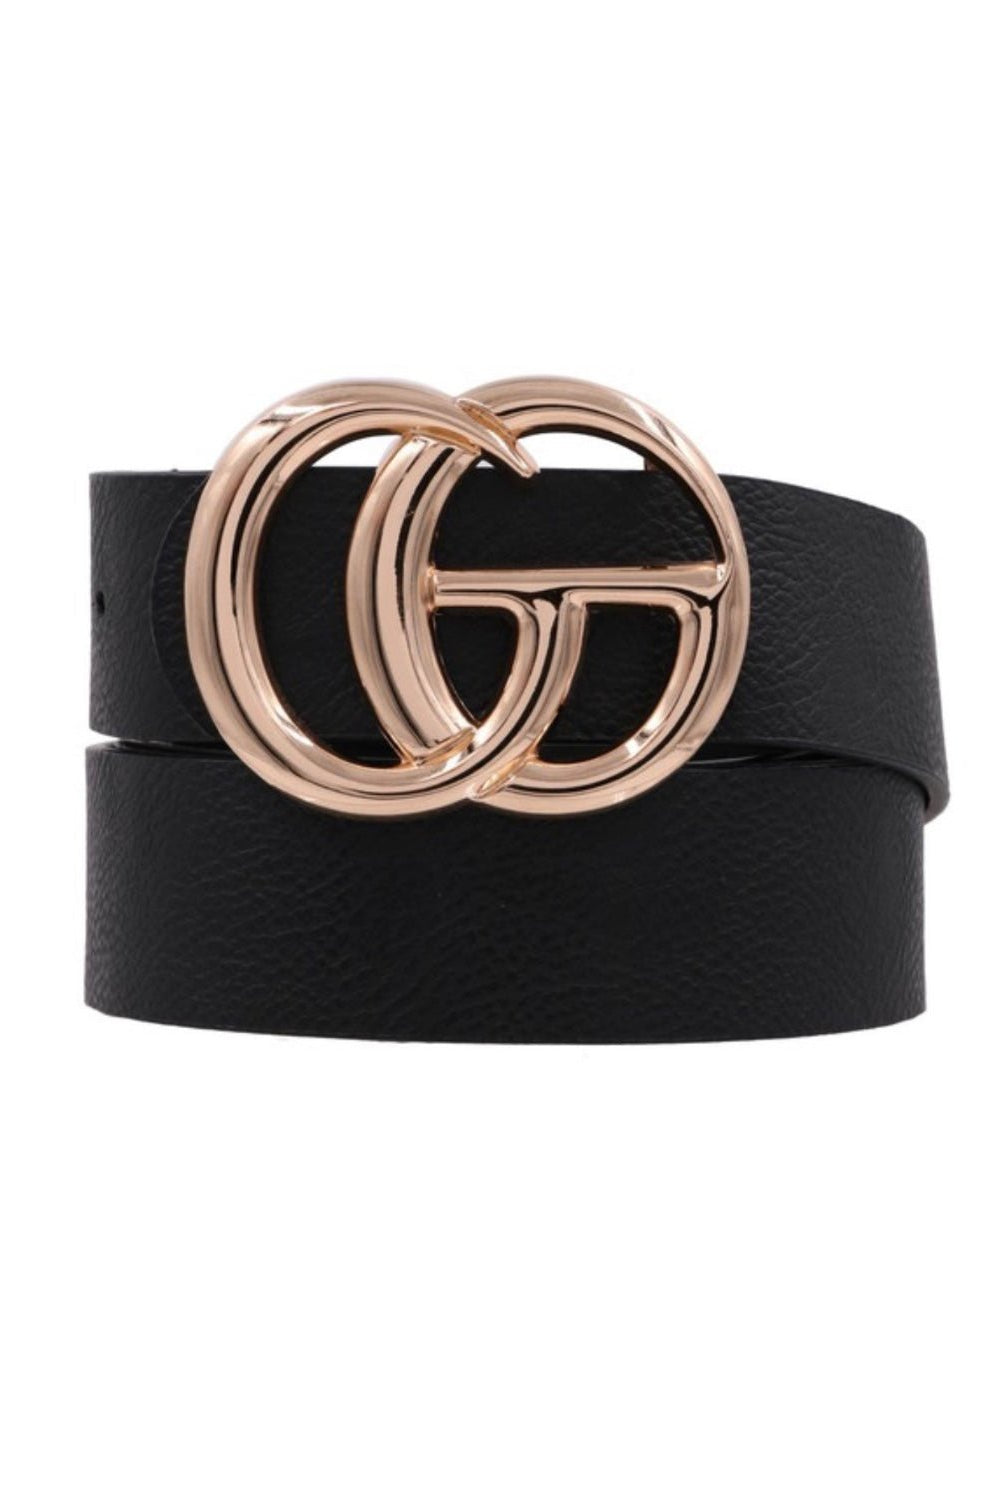 Plus Size CG Belt - -Jimberly's Boutique-Olive Branch-Mississippi